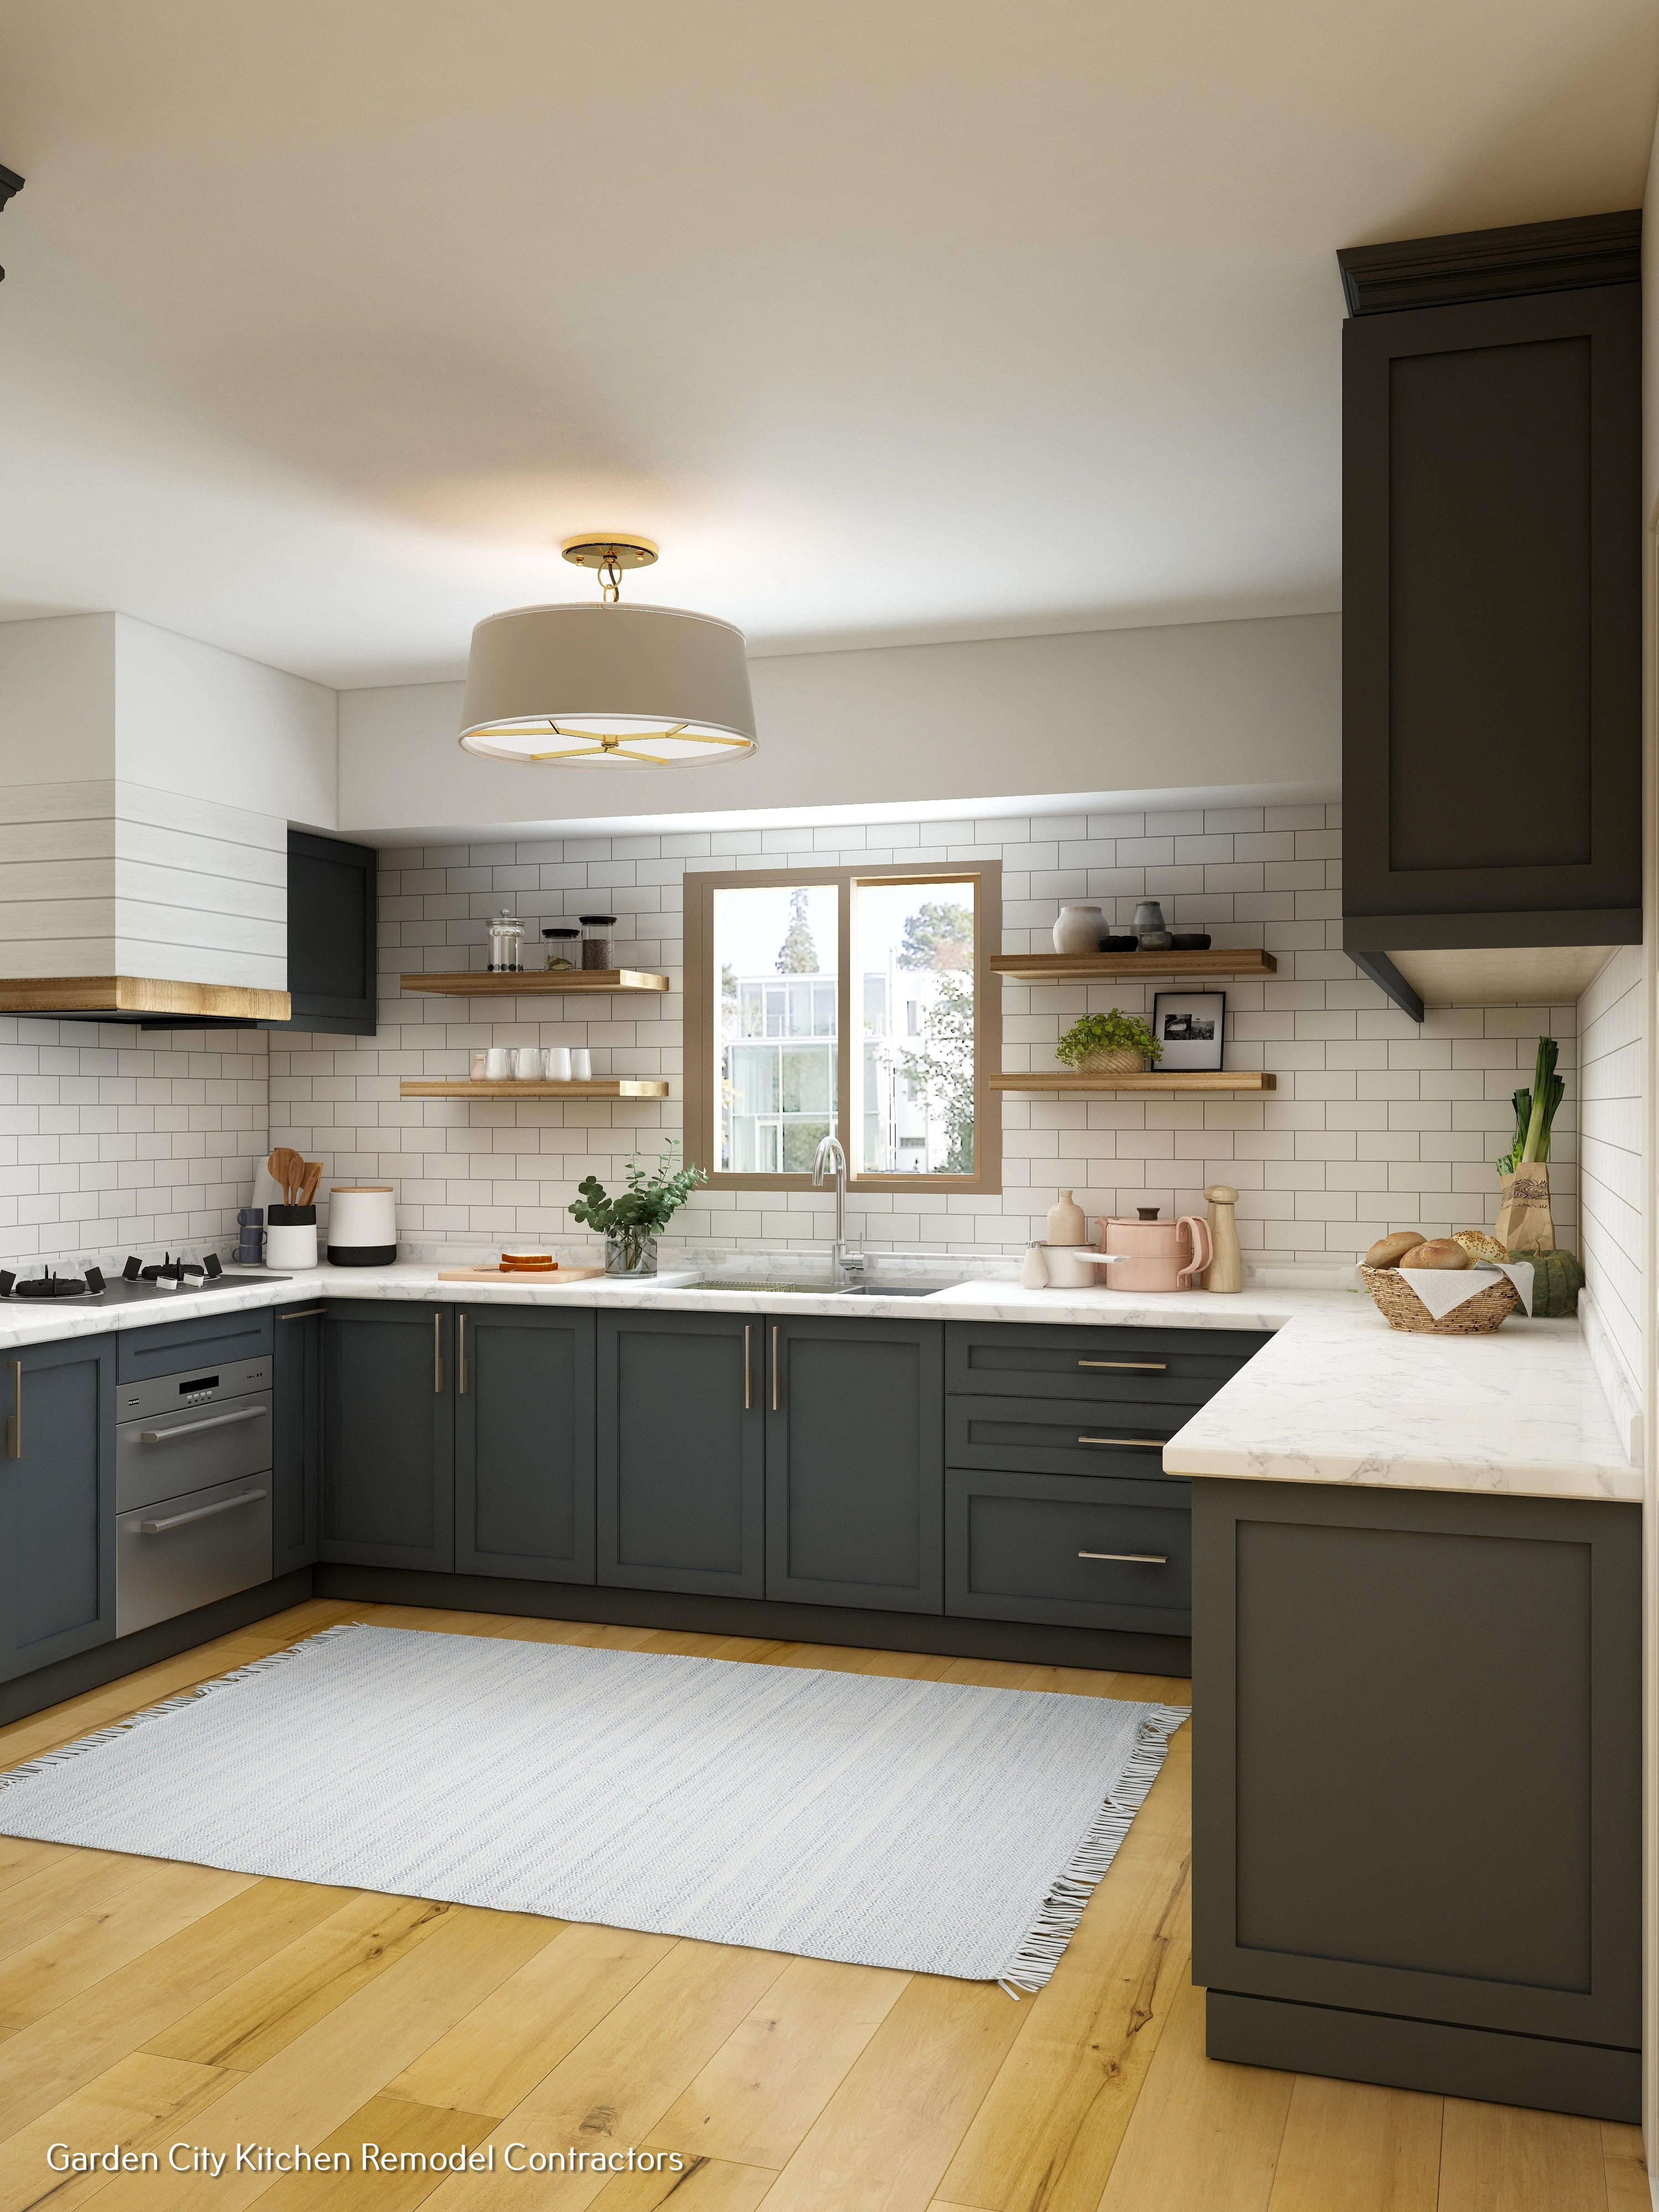 Kitchen Tune-Up Boise, ID, Announces the Benefits of Working with Experts for Home Remodeling